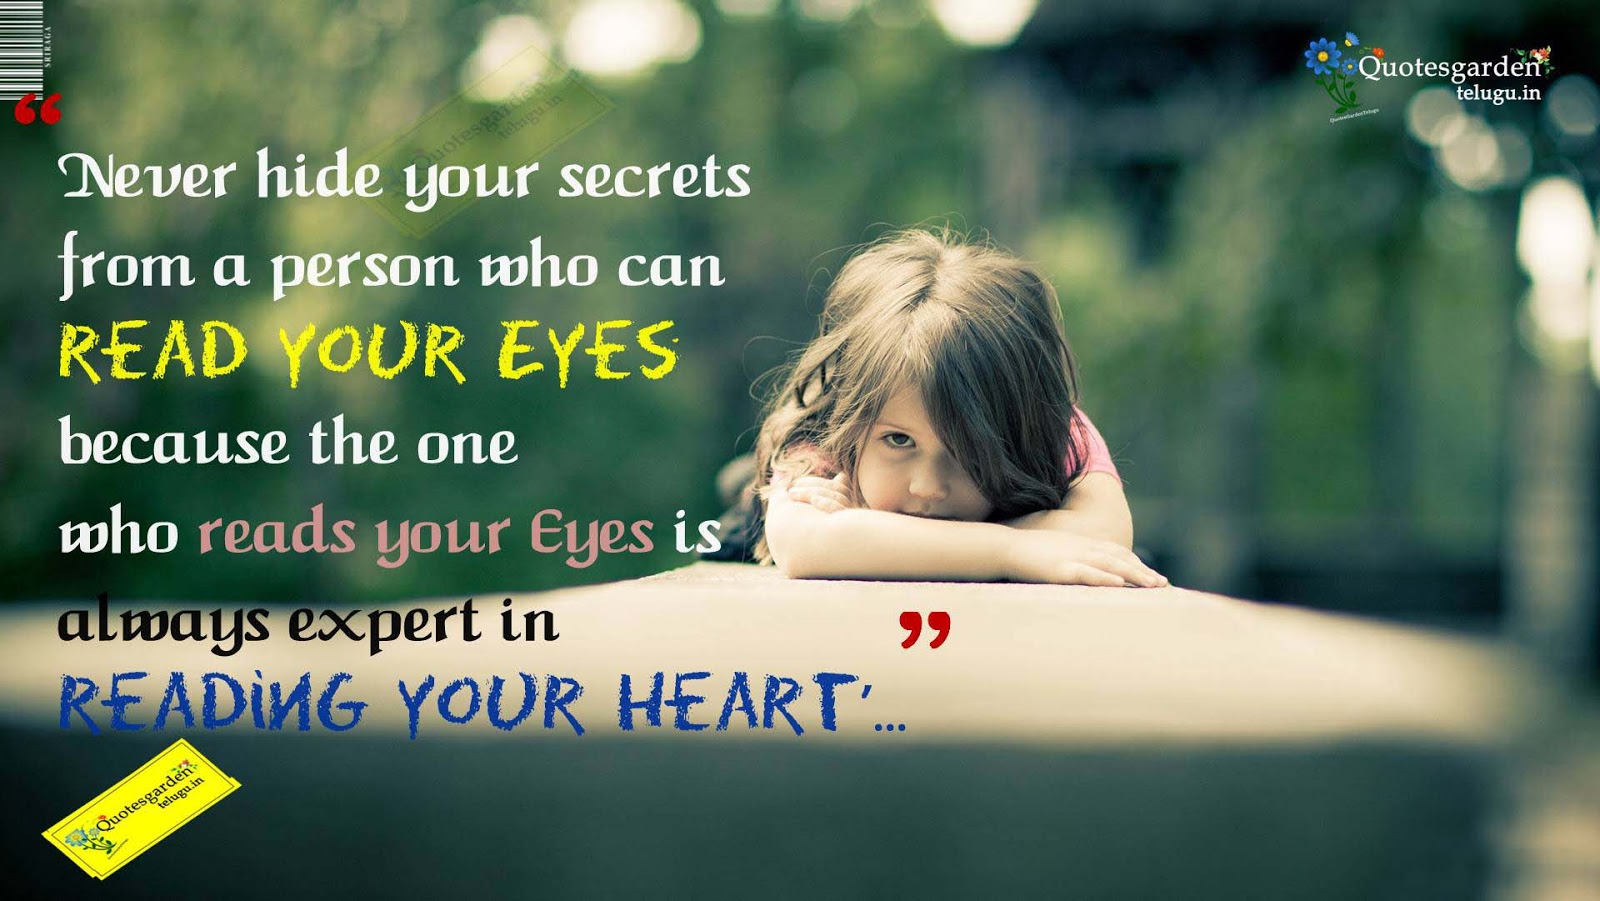 Heart touching Quotes with hd wallpapers 774  QUOTES GARDEN TELUGU   Telugu Quotes  English Quotes  Hindi Quotes 